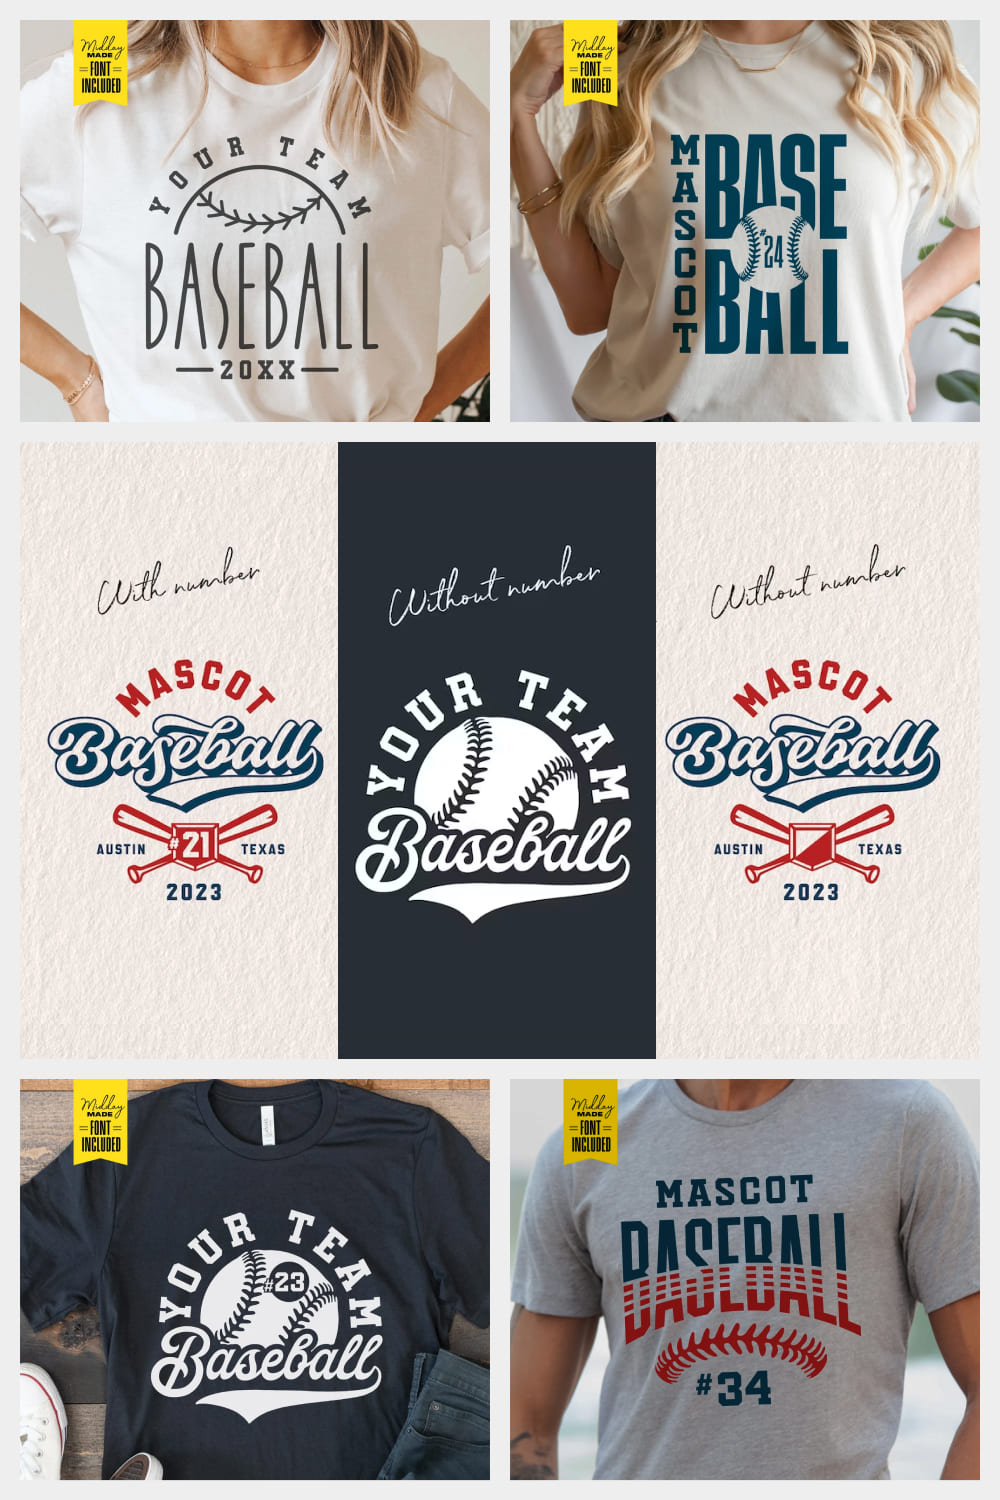 Collage of photos of t-shirts with baseball logos.